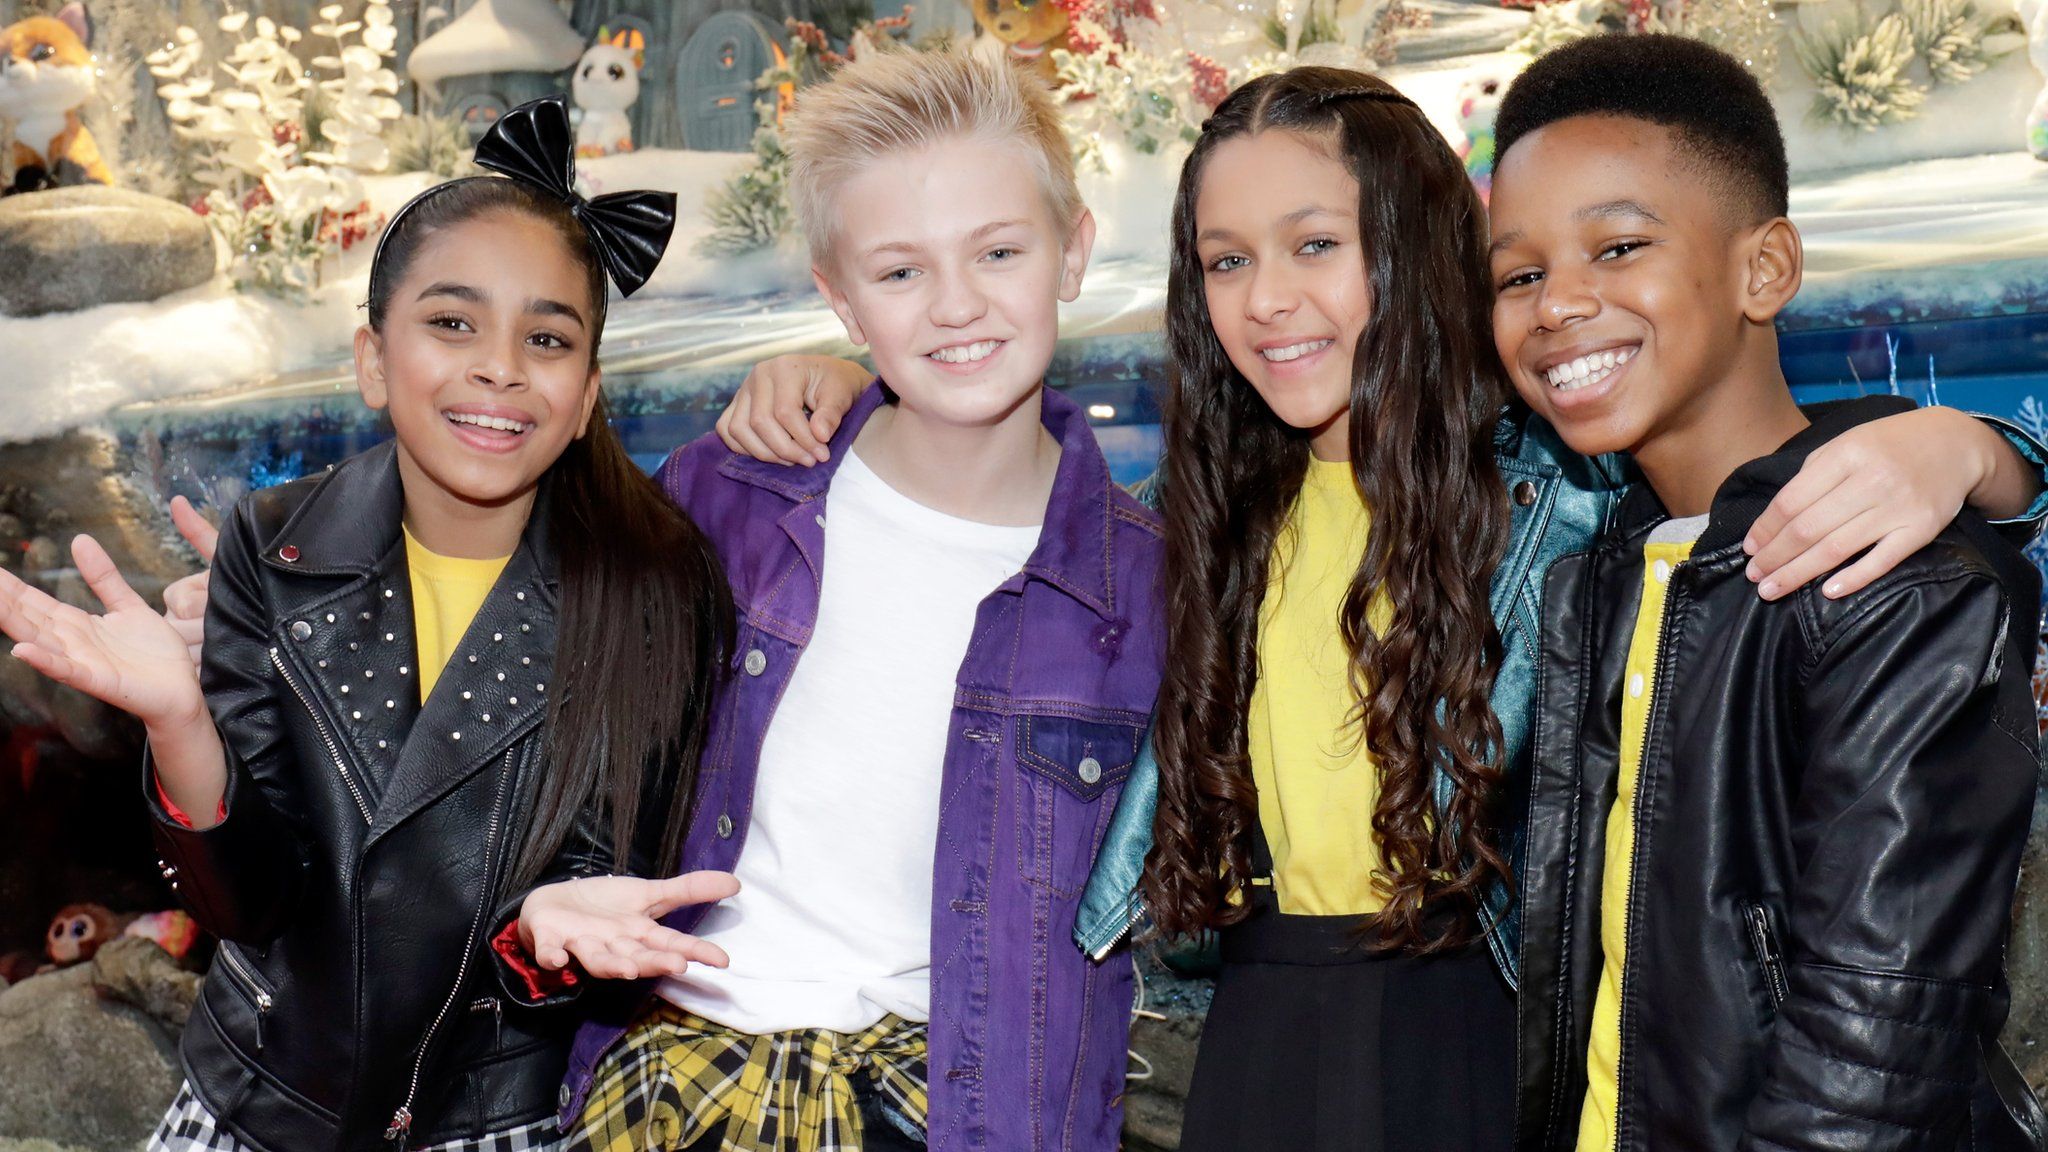 Kidz Bop: How the gang cope with nerves